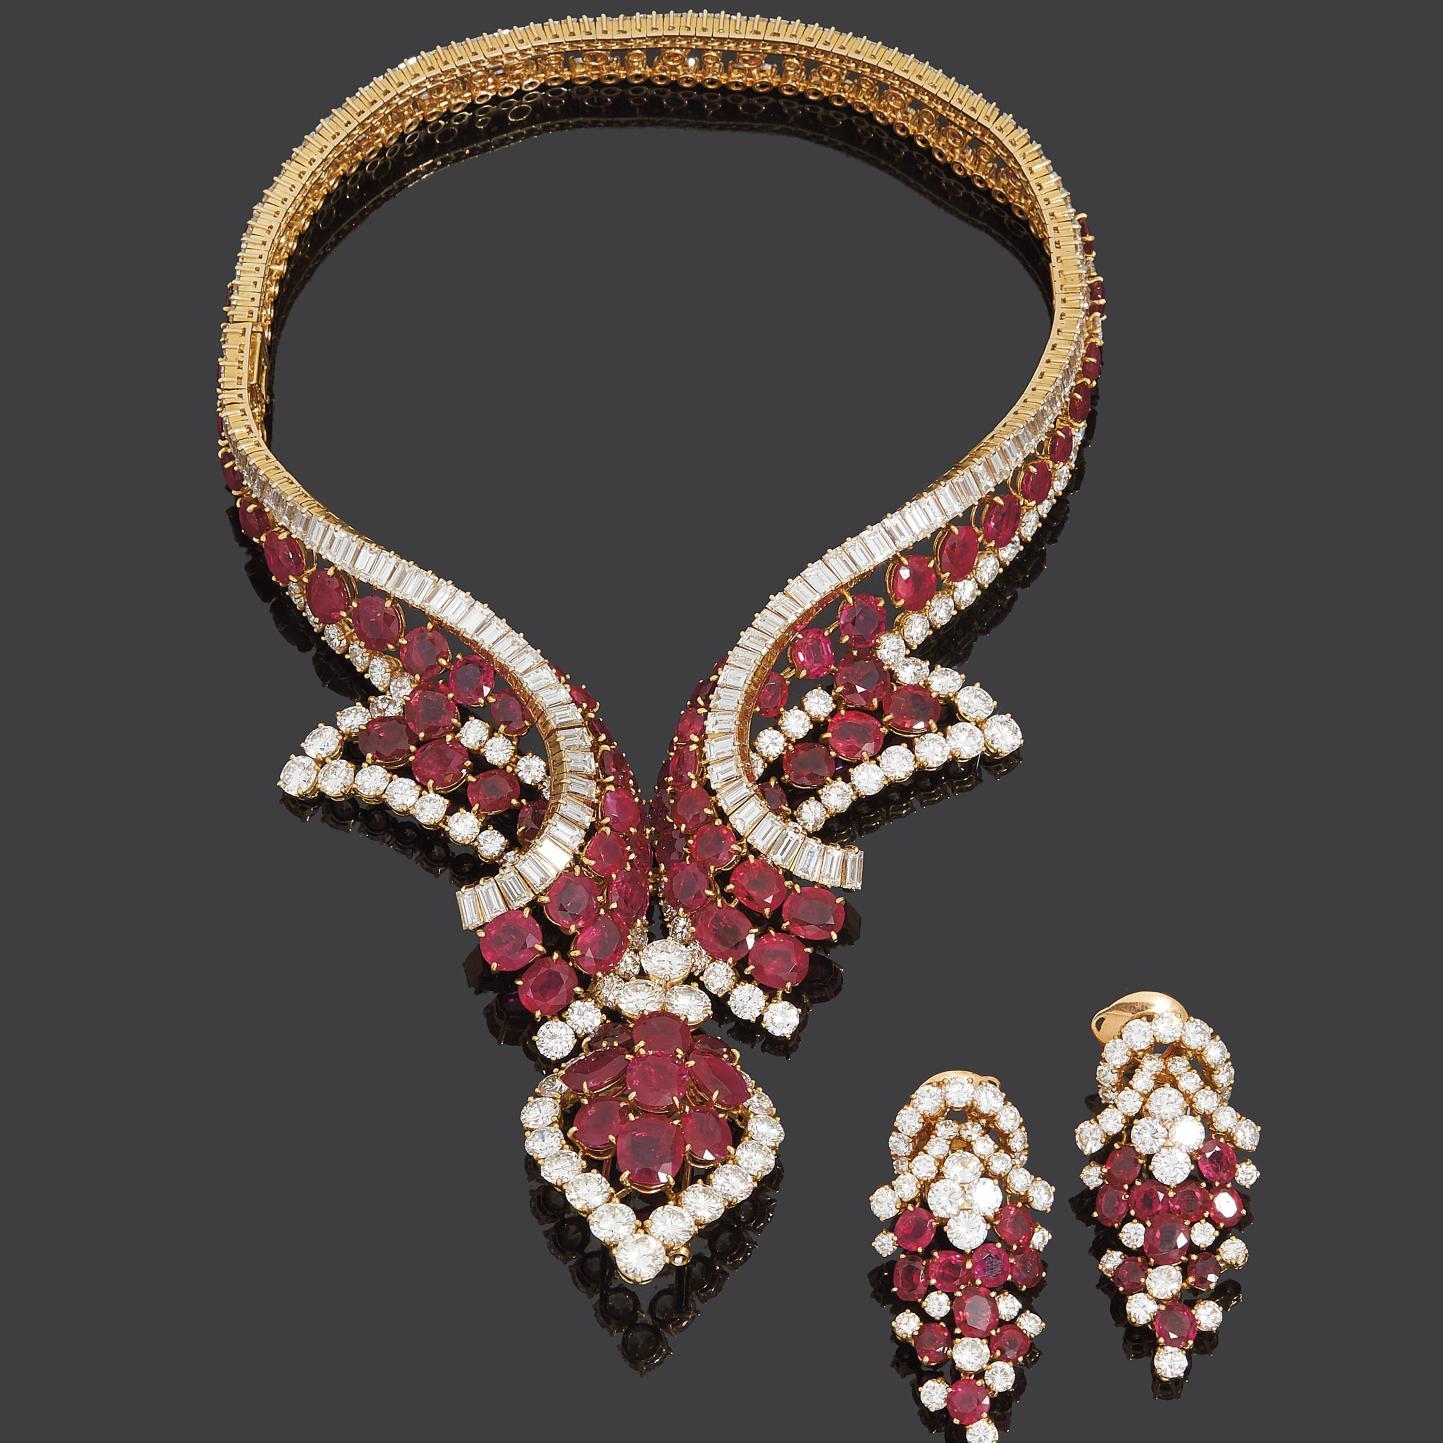 The Medicis celebrated in jewelry - Lots sold